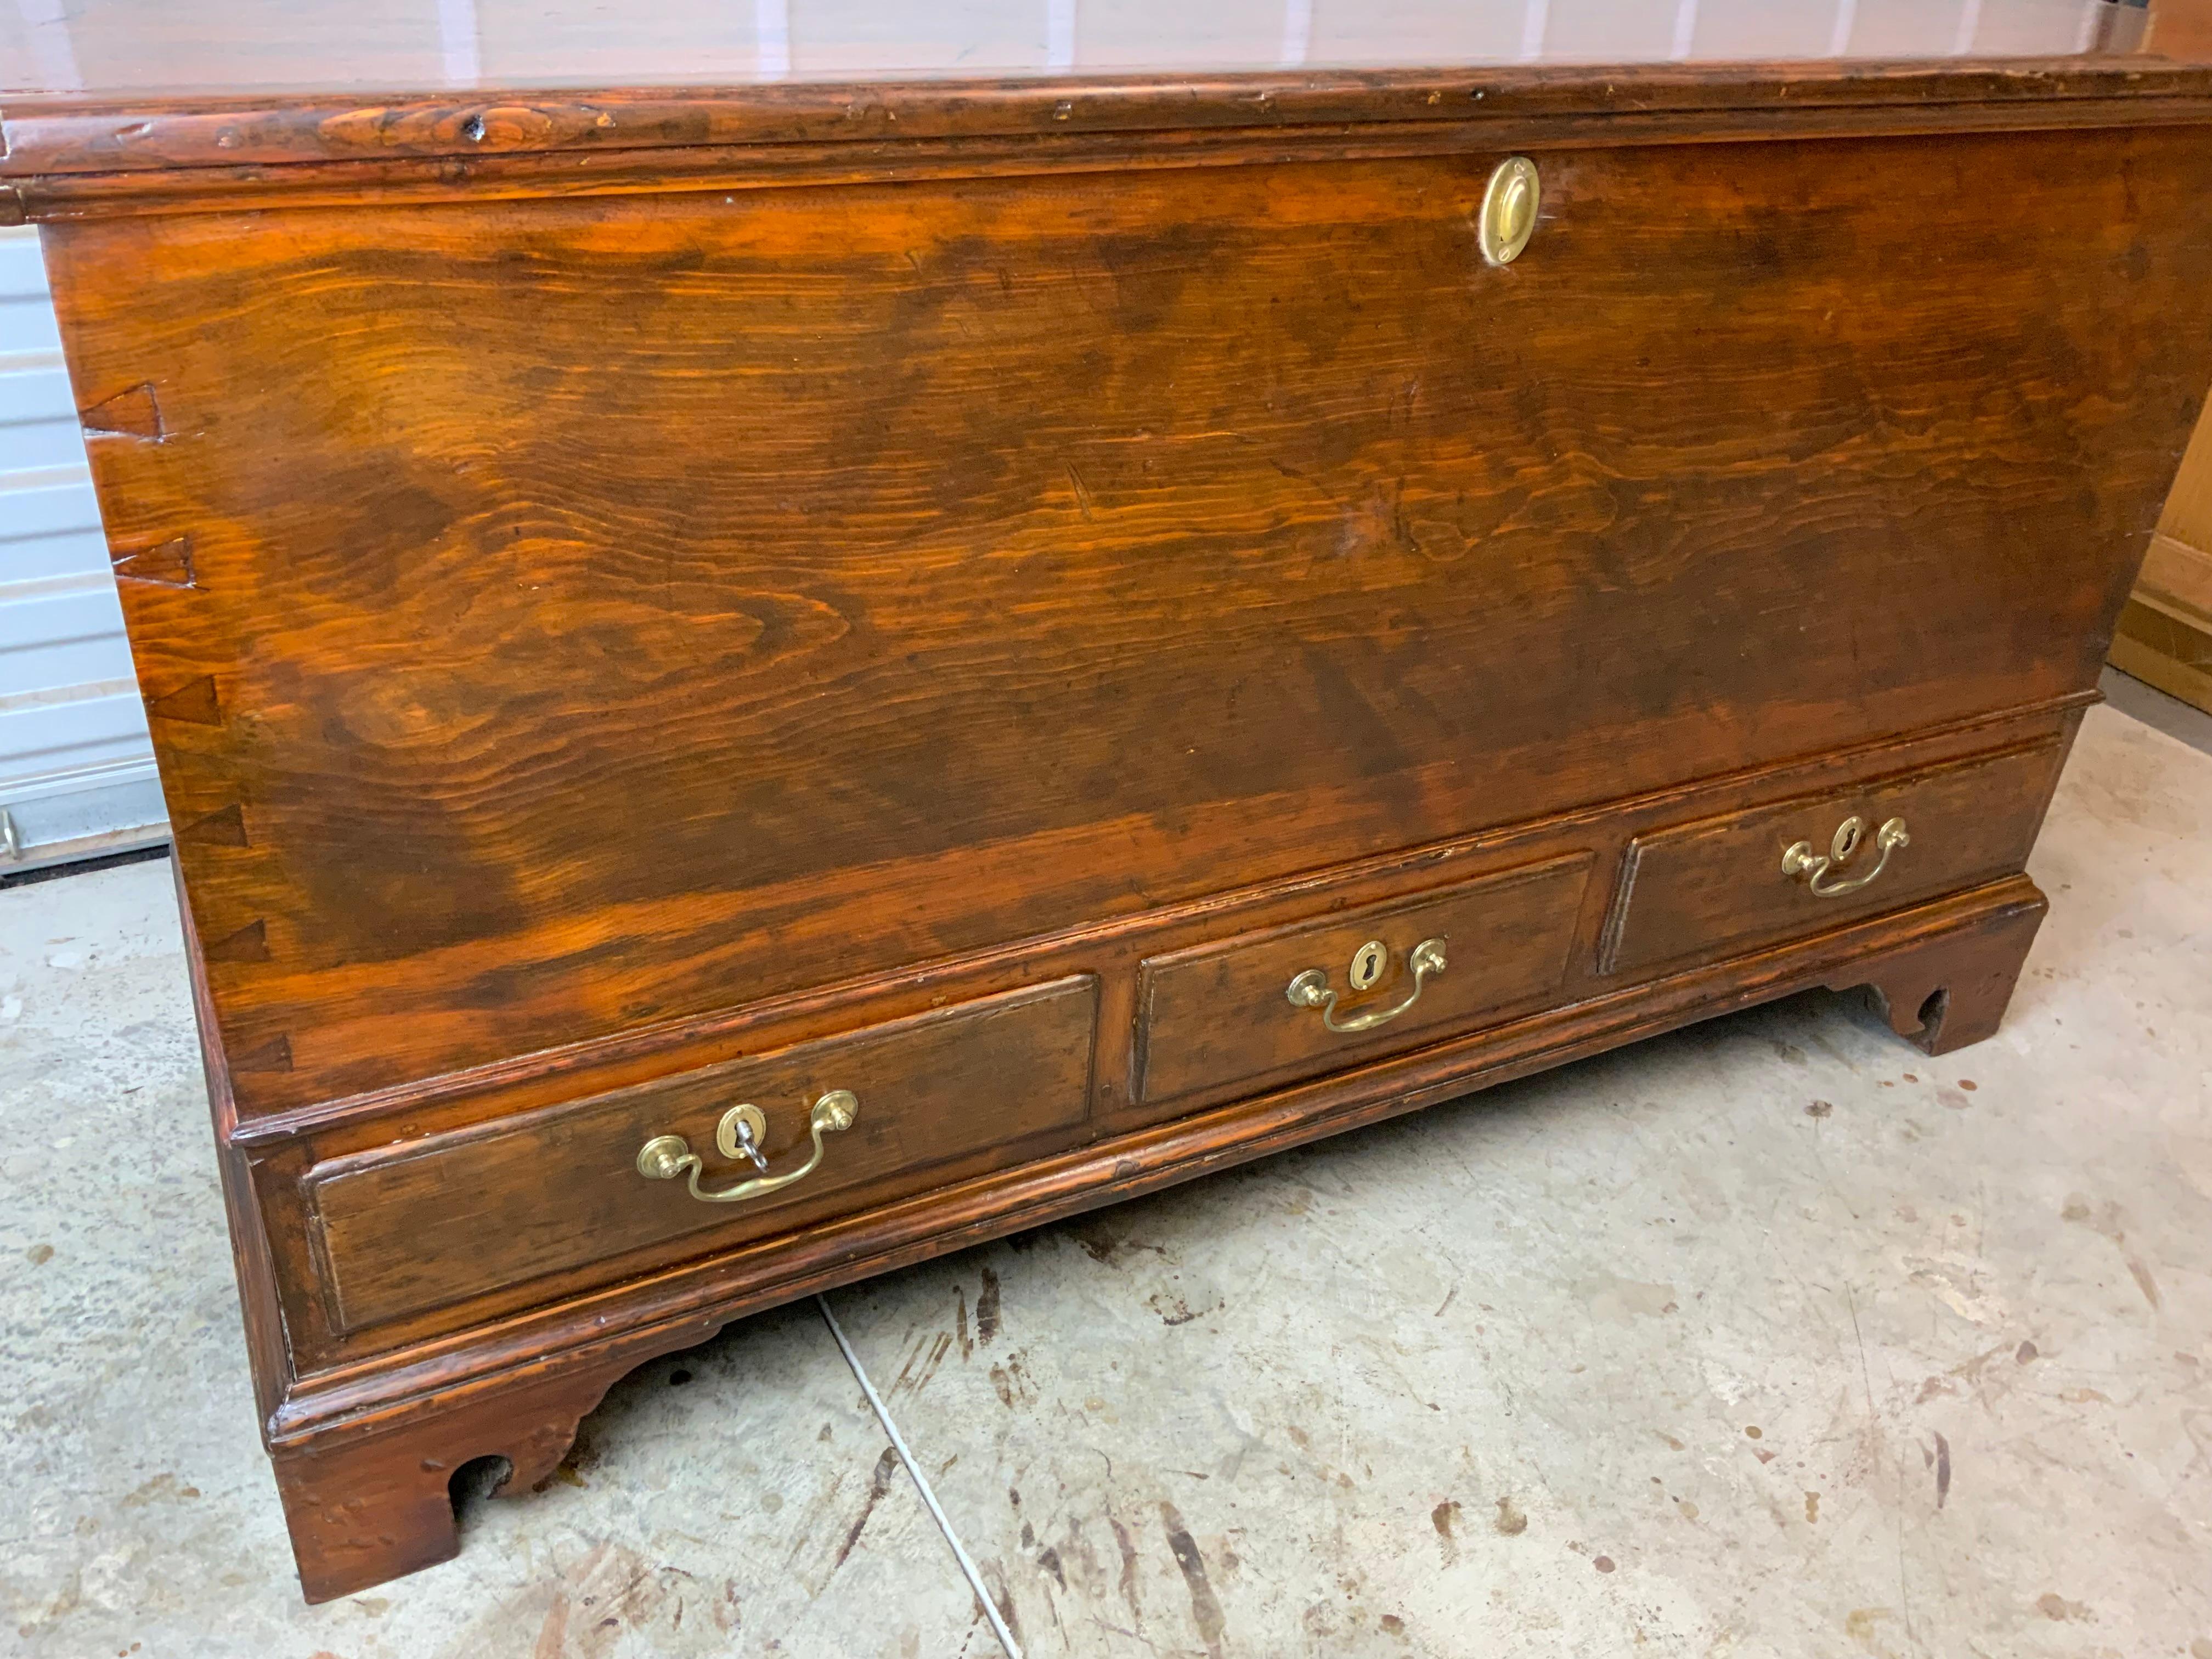 A great example of a large Pine six board 18th century Chippendale blanket chest. This piece has an excellent color and patina on an older refinish and has been cleaned and waxed.  Drawer hardware is original to the piece and all the locks are